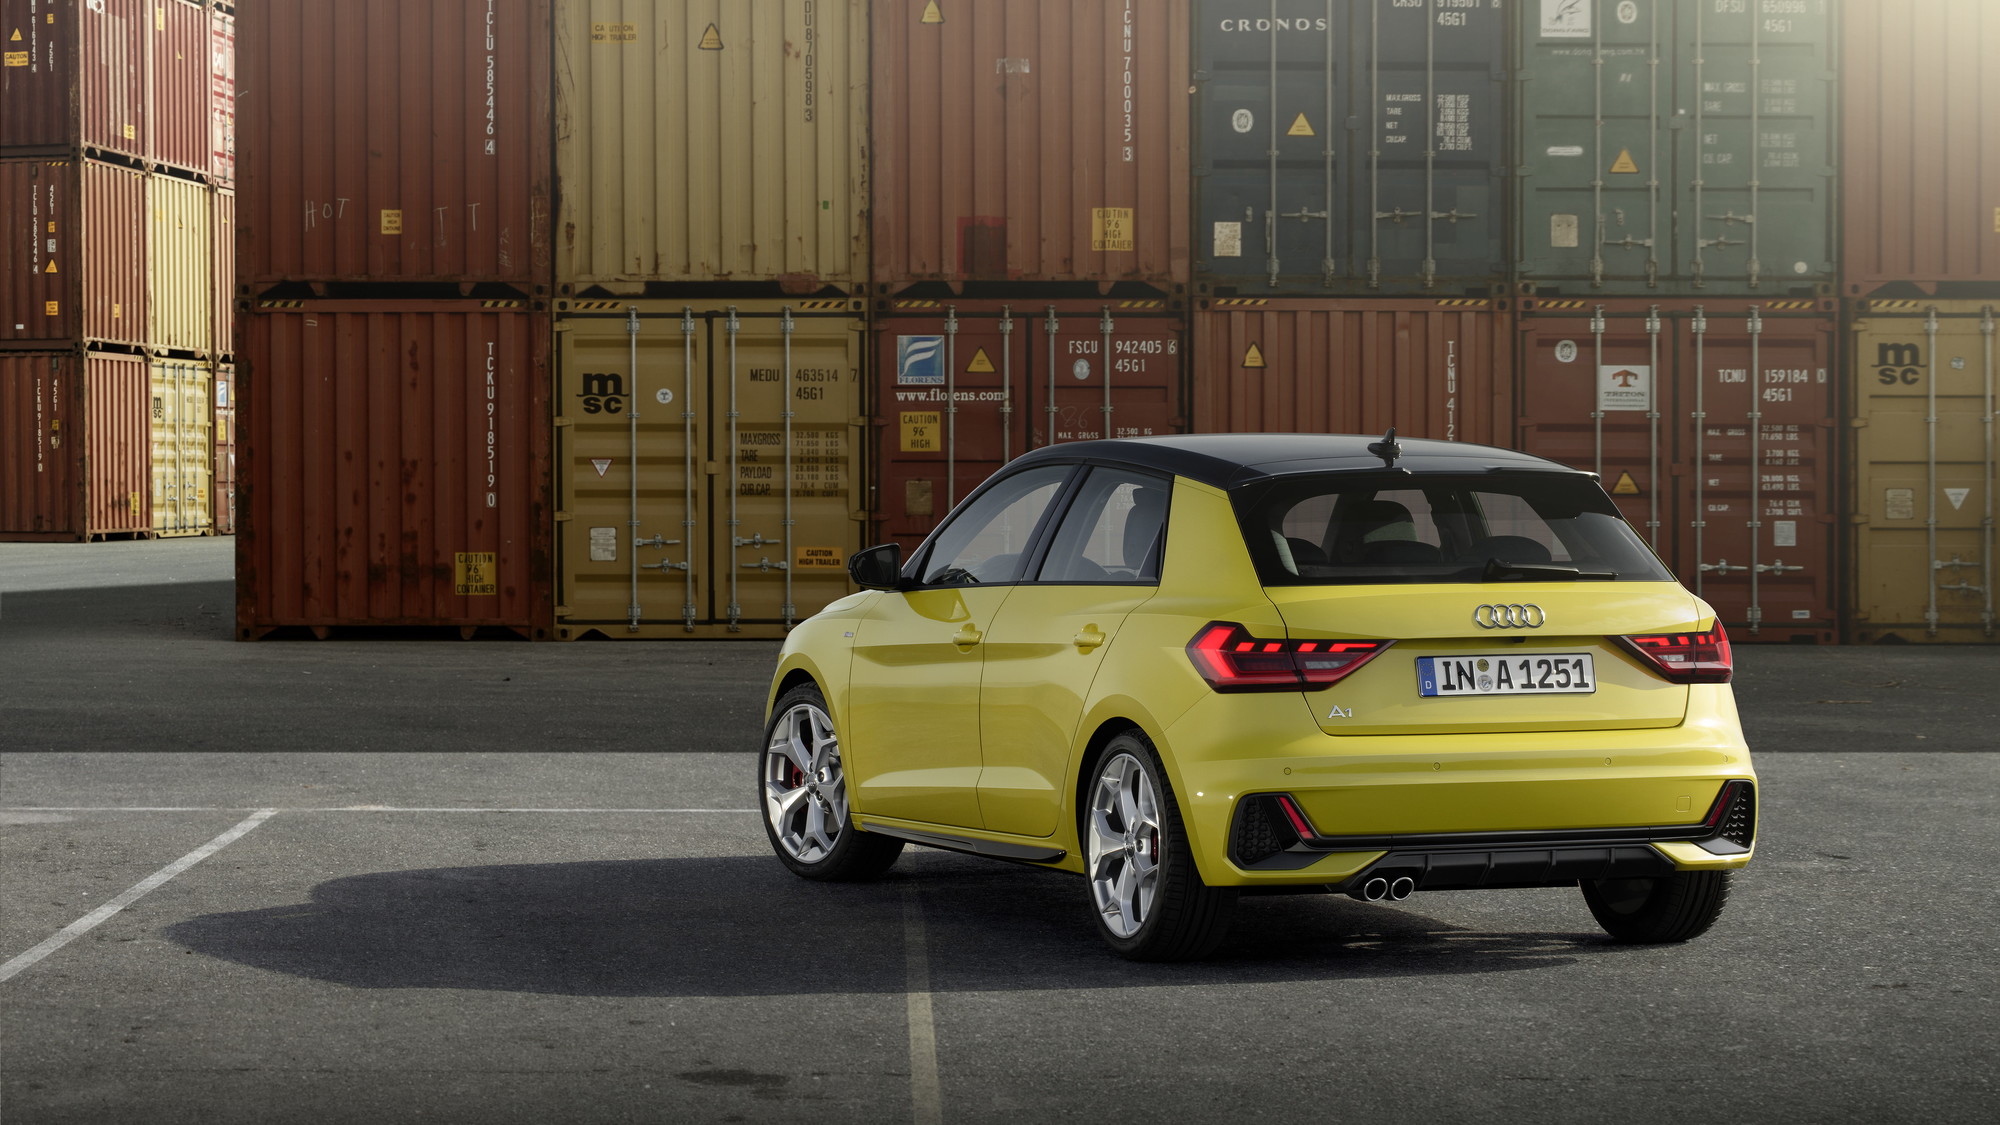 The new Audi A1 is here, and it is very angry